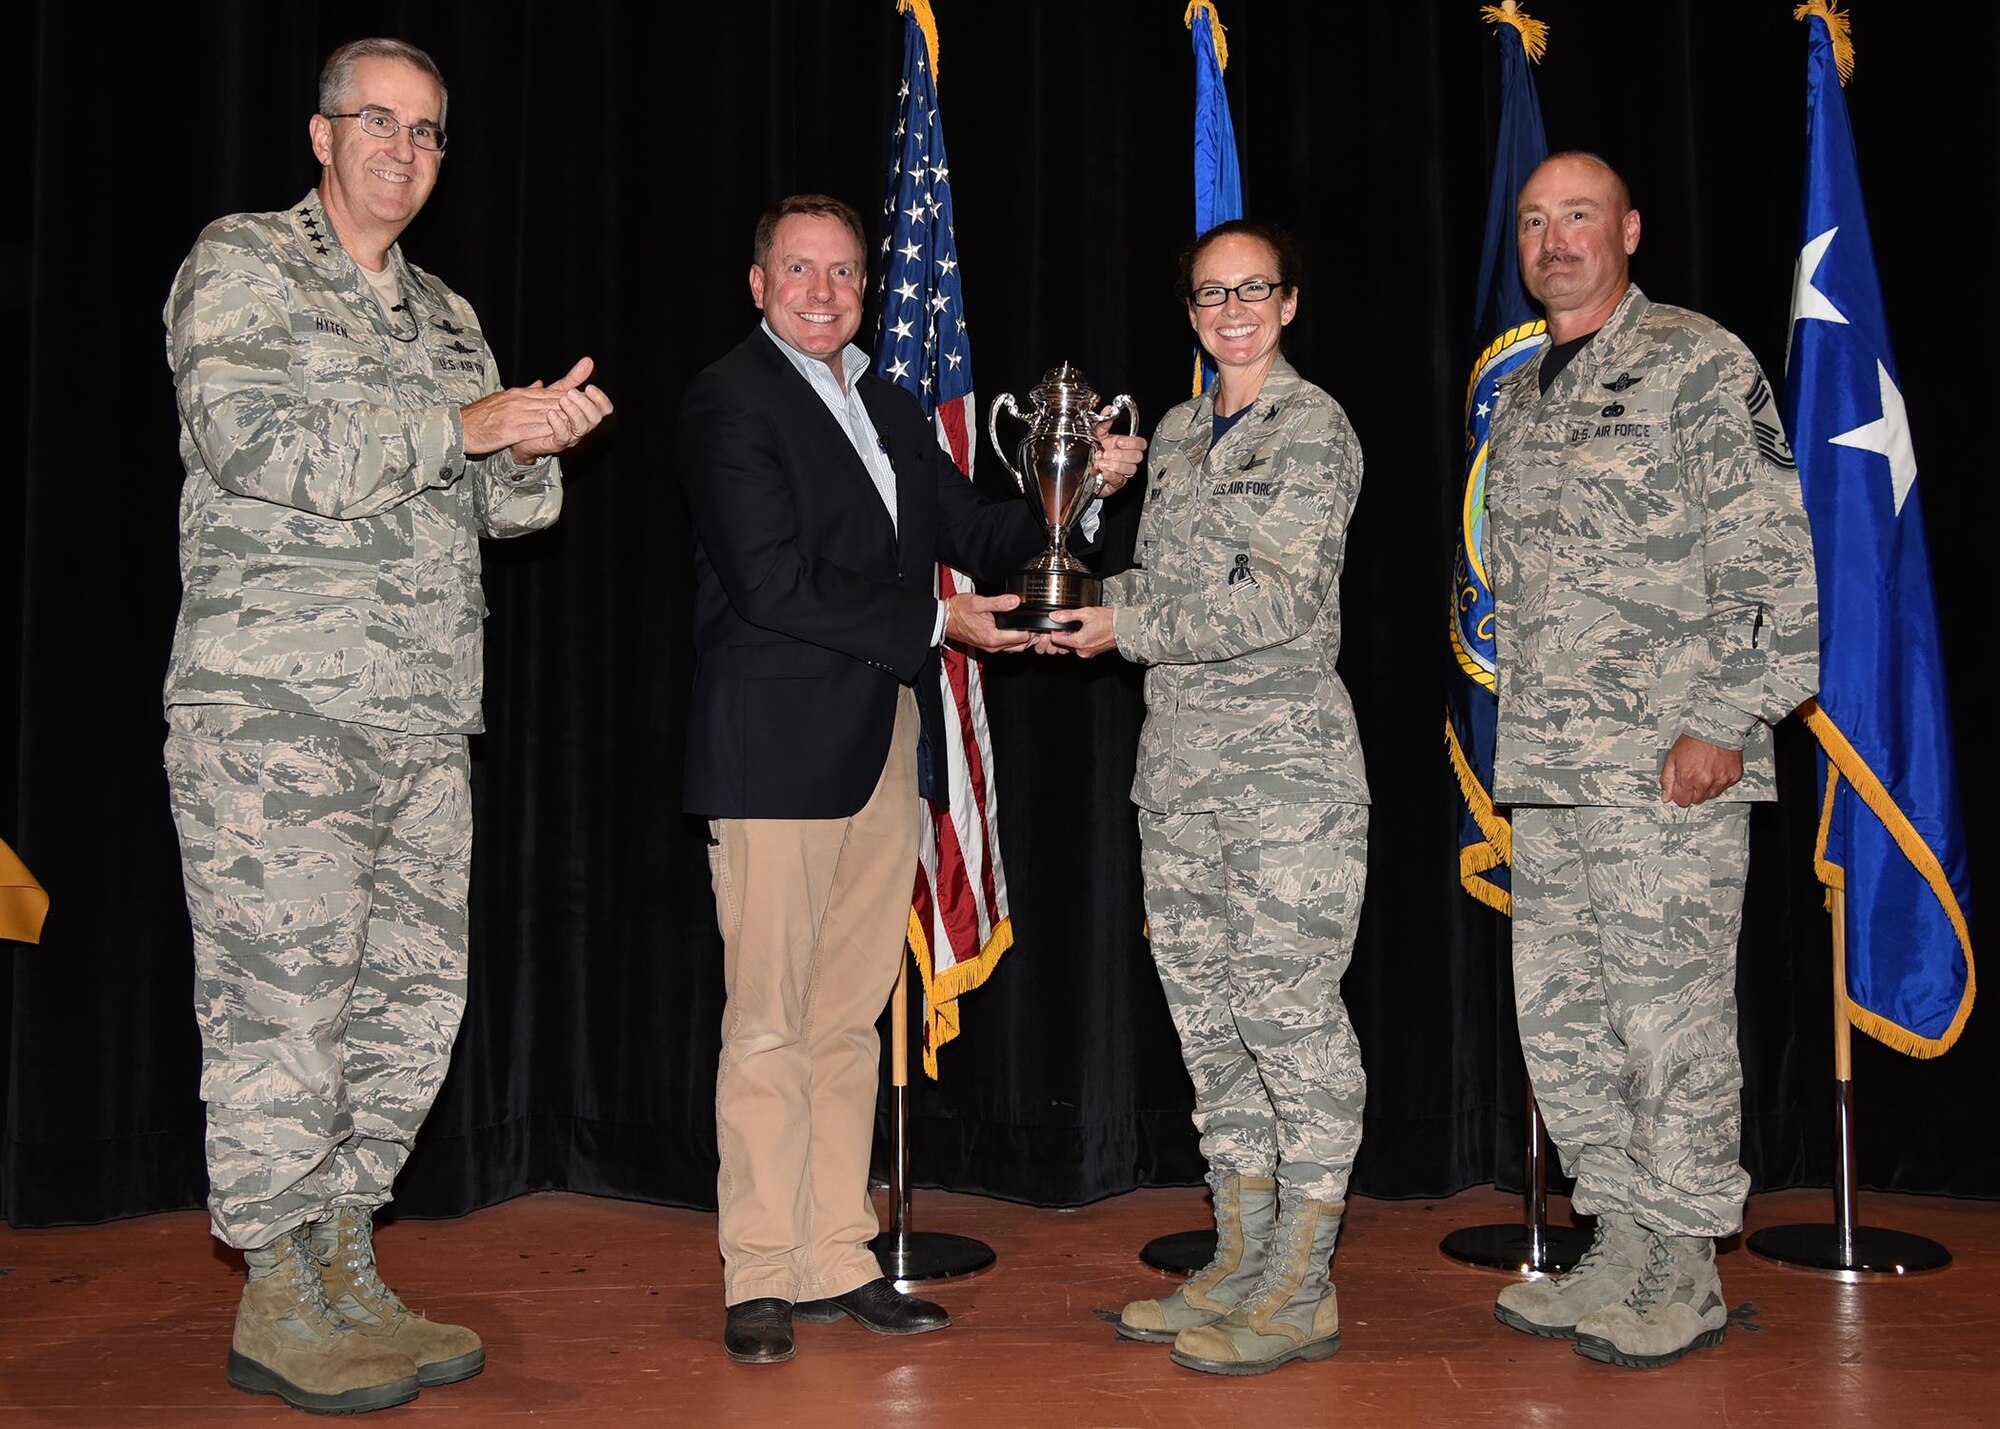 General John Hyten, commander of U.S. Strategic Command, and Tom Janssen, member of the strategic command consultation committee, present the Omaha Trophy to Col. Stacy Huser, 90th Missile Wing commander and incoming Command Chief Master Sgt. Kristian Farve during an all-call at the F. E. Warren Air Force Base, Wyo., theater July 21, 2017. The Omaha Trophy is awarded to the best missile wing in USSTRATCOM. (U.S. Air Force photo by Glenn S. Robertson)